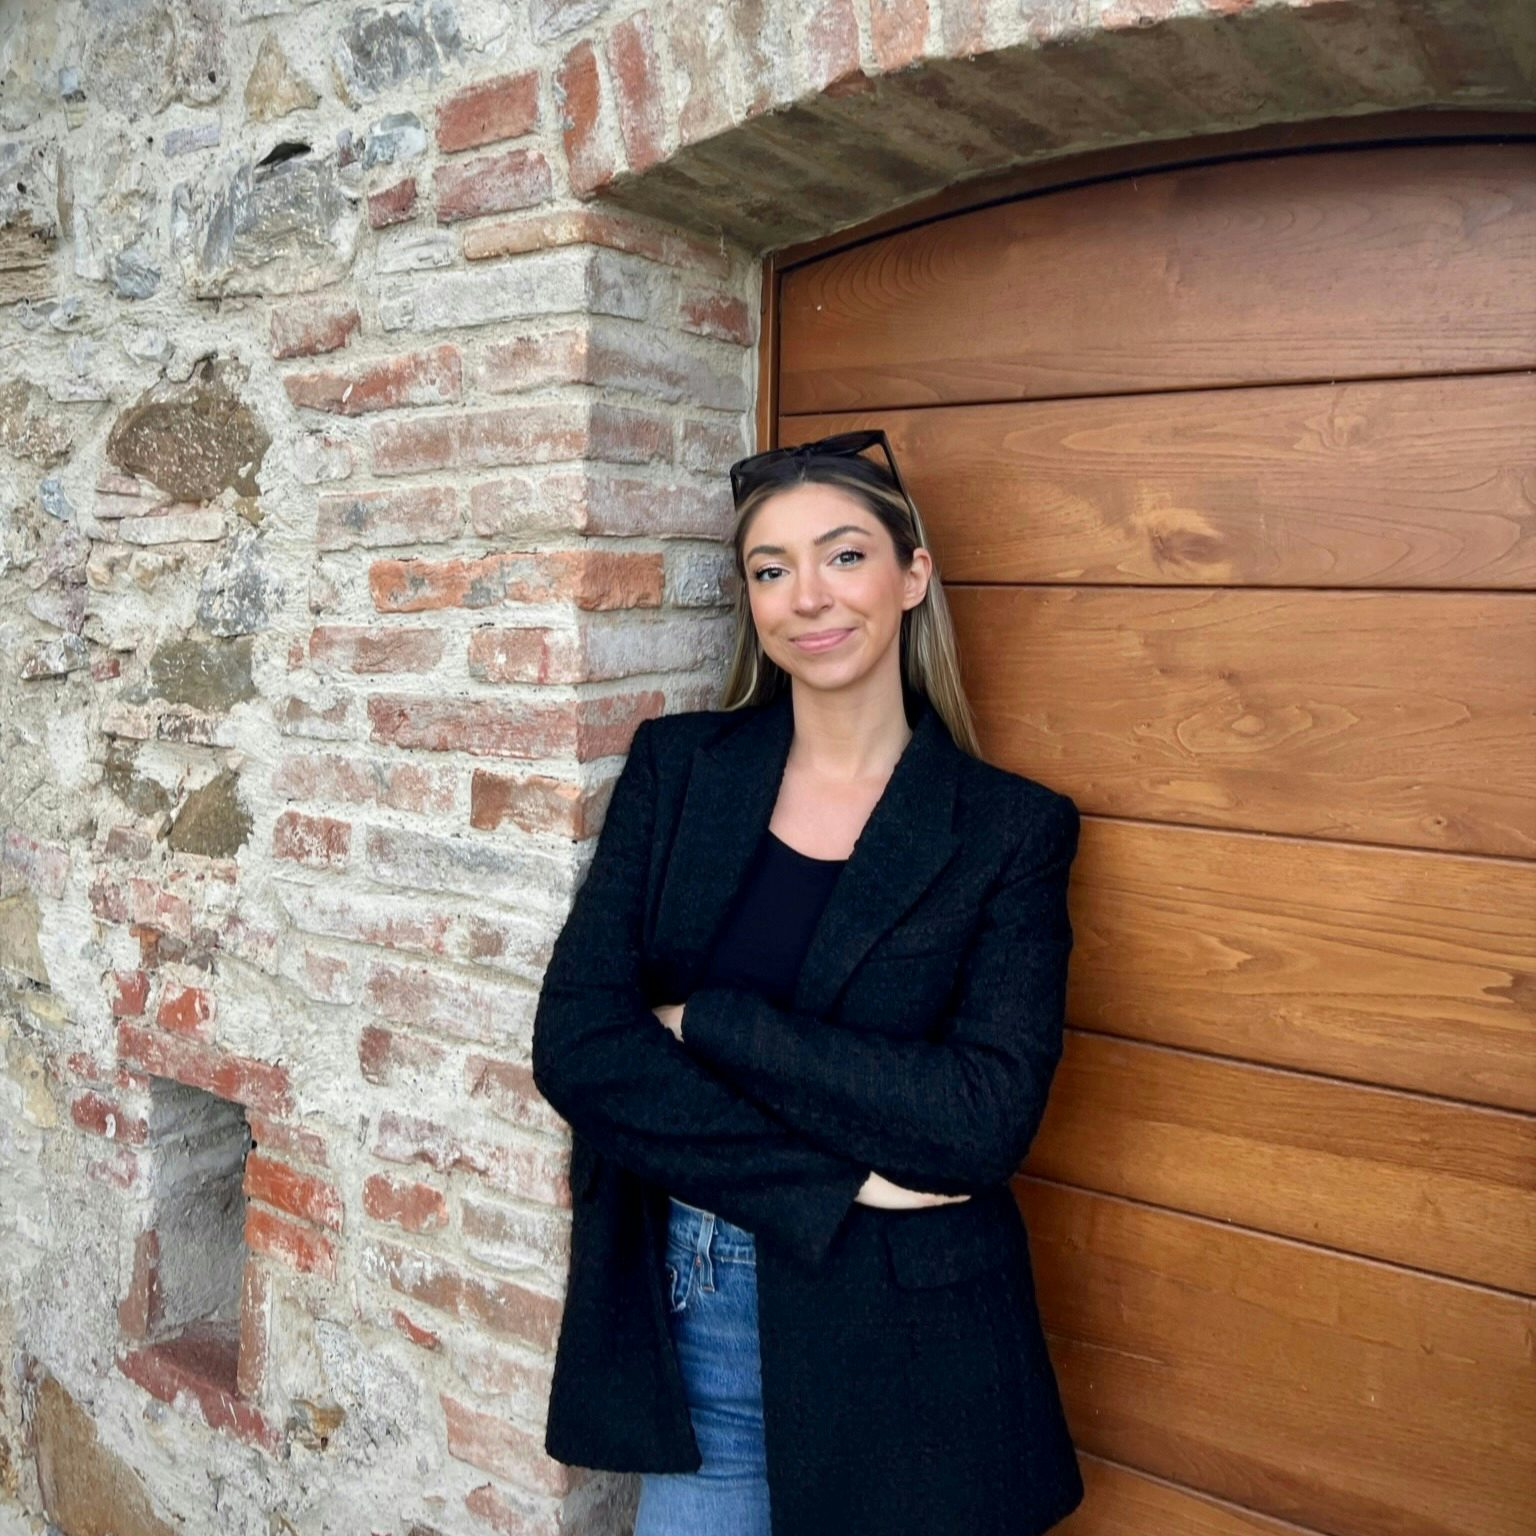 Travel Advisor Emily Herlan with a black jacket, standing in front of a wooden door and brick building.